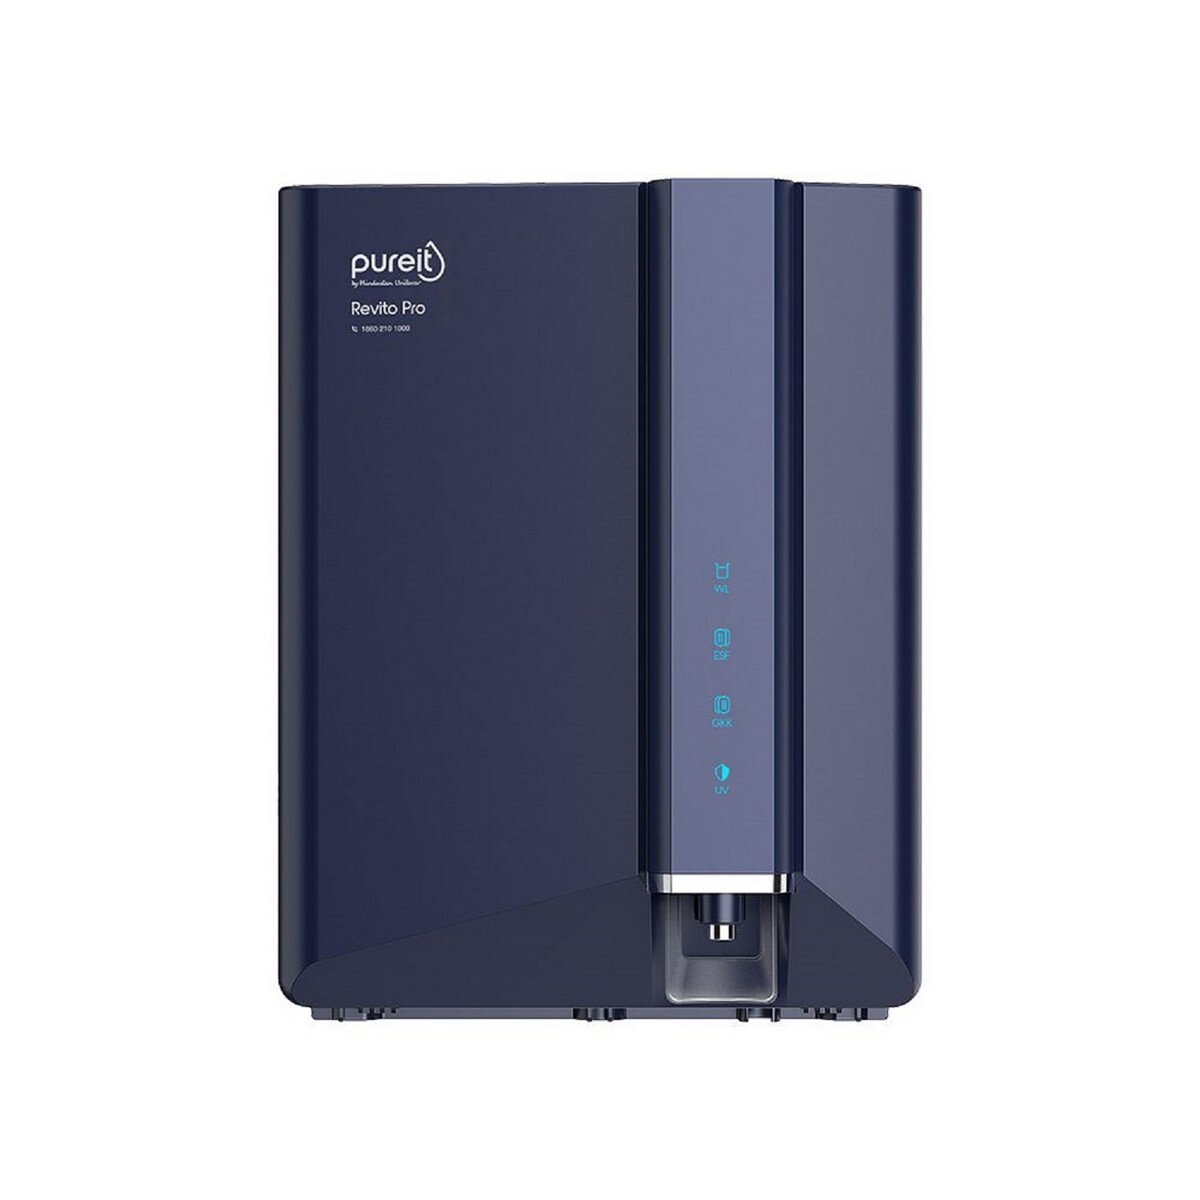 Pureit Revito Pro 8L RO + MF + UV Water Purifier with Micro Filter Blue